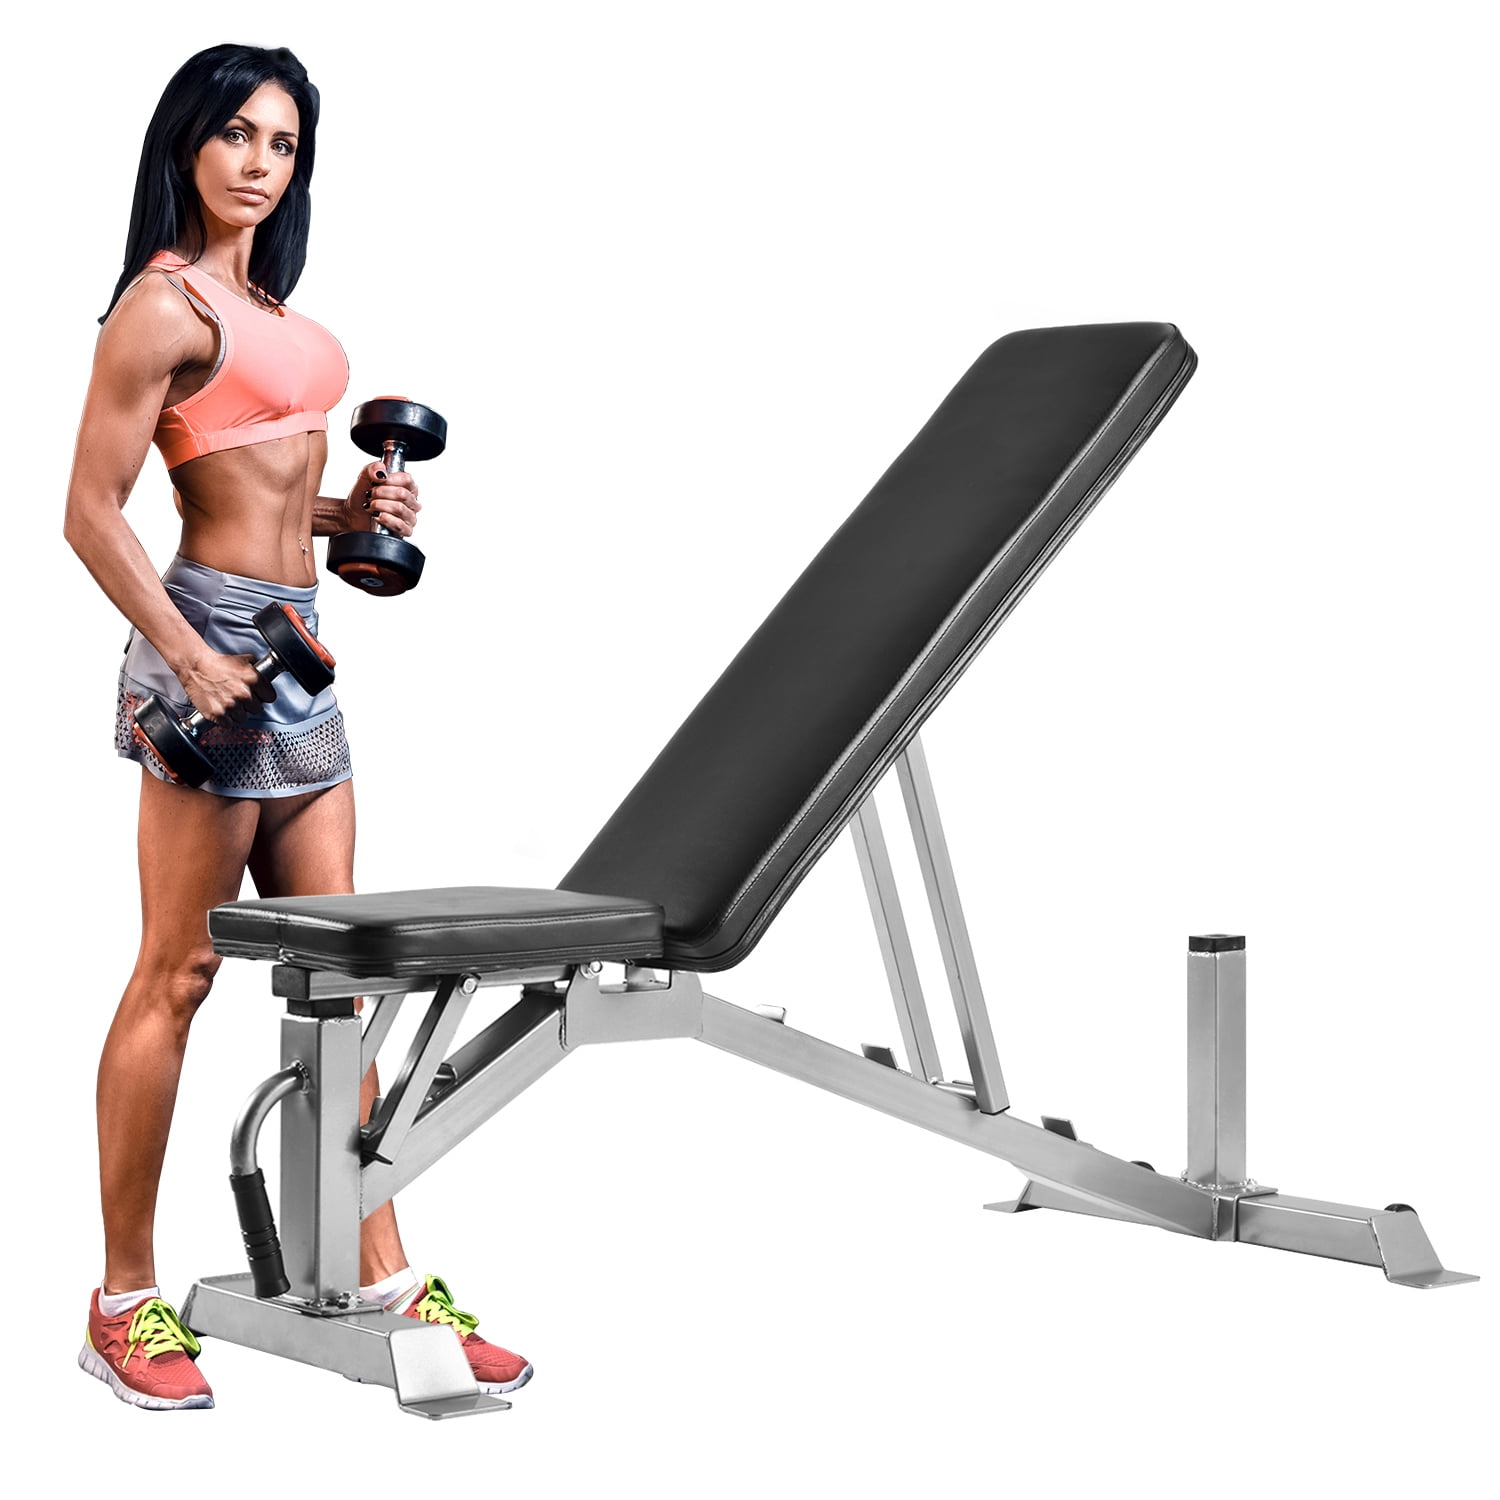 Details about   Foldable Sit Up Bench Abdominal Fitness Workout Home Gym Exercise Equipment US 